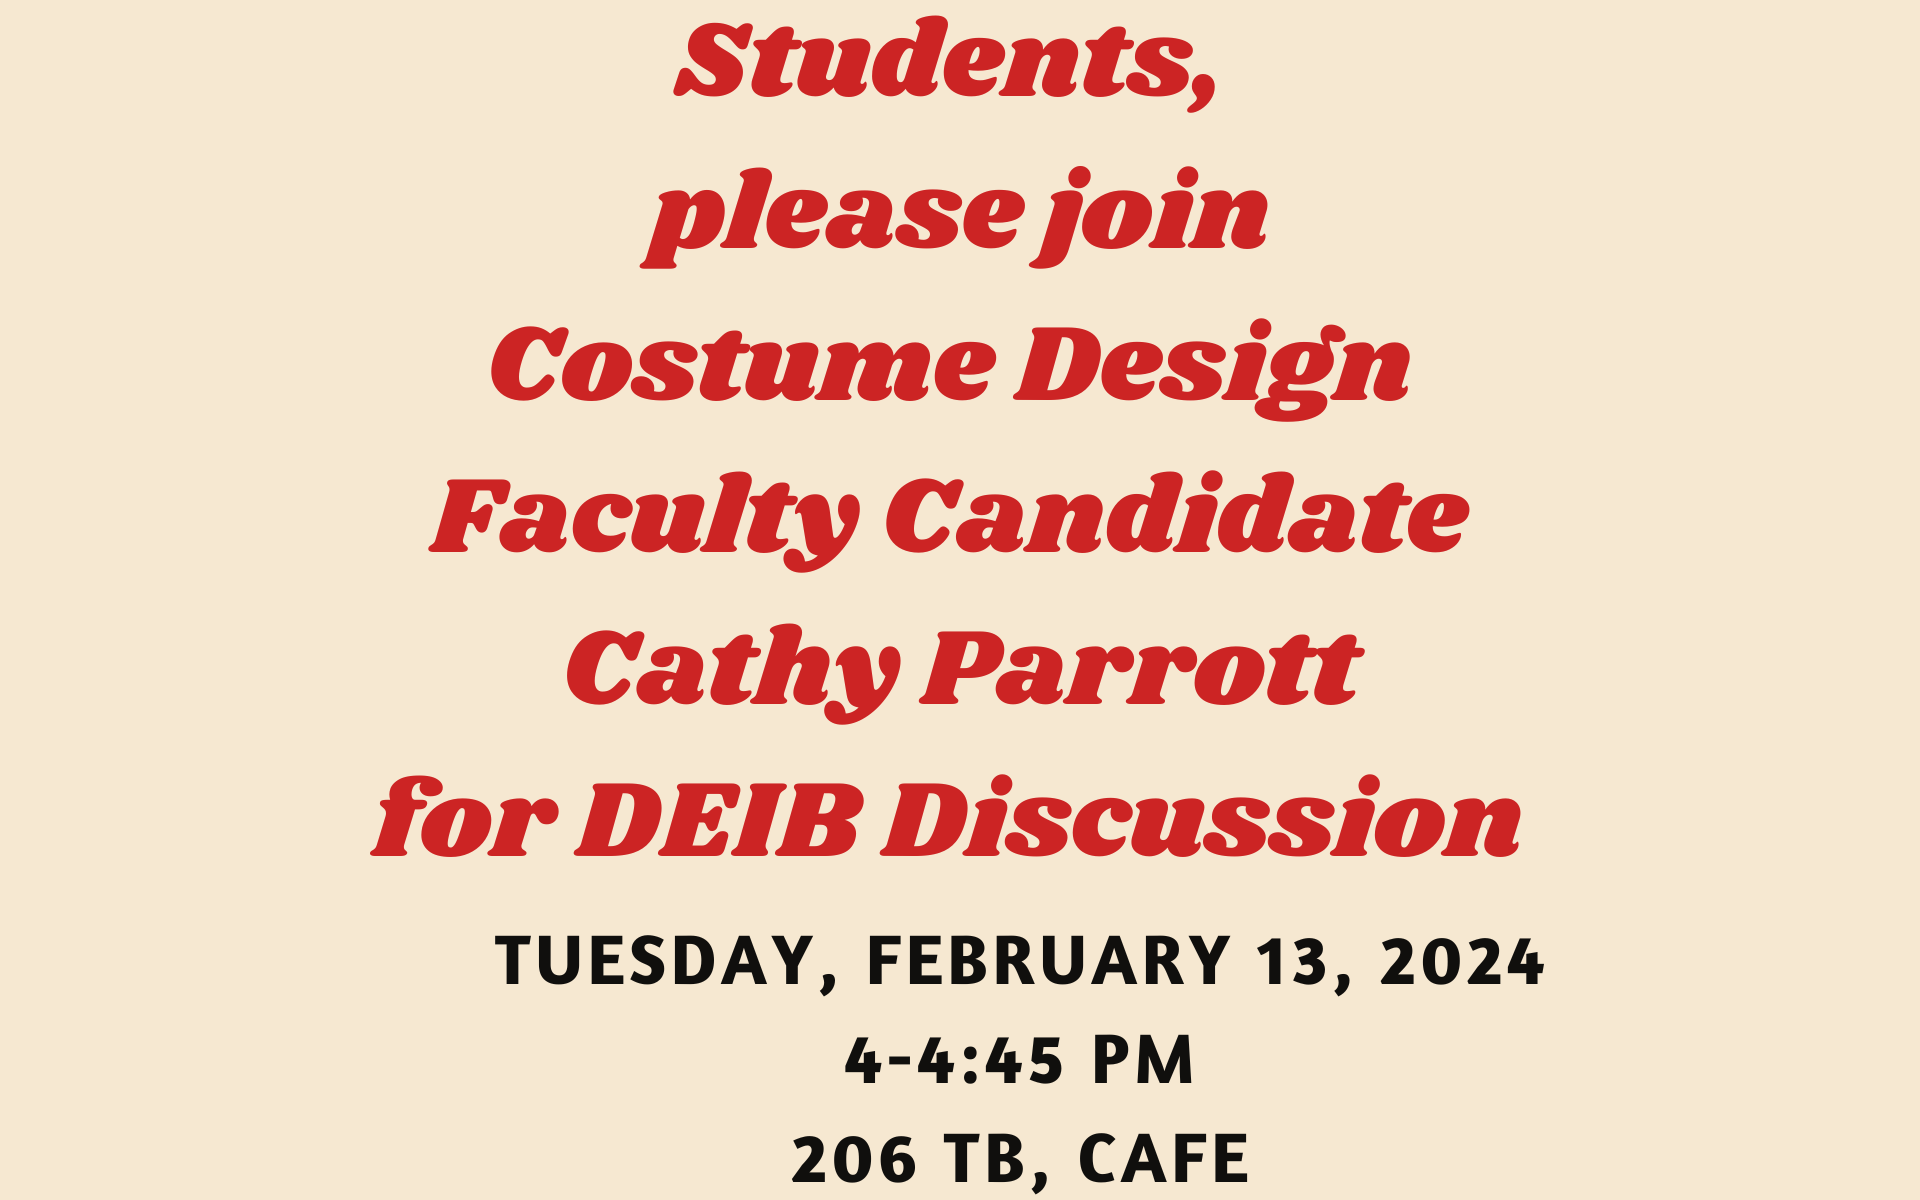 DEIB Discussion with students and faculty candidate